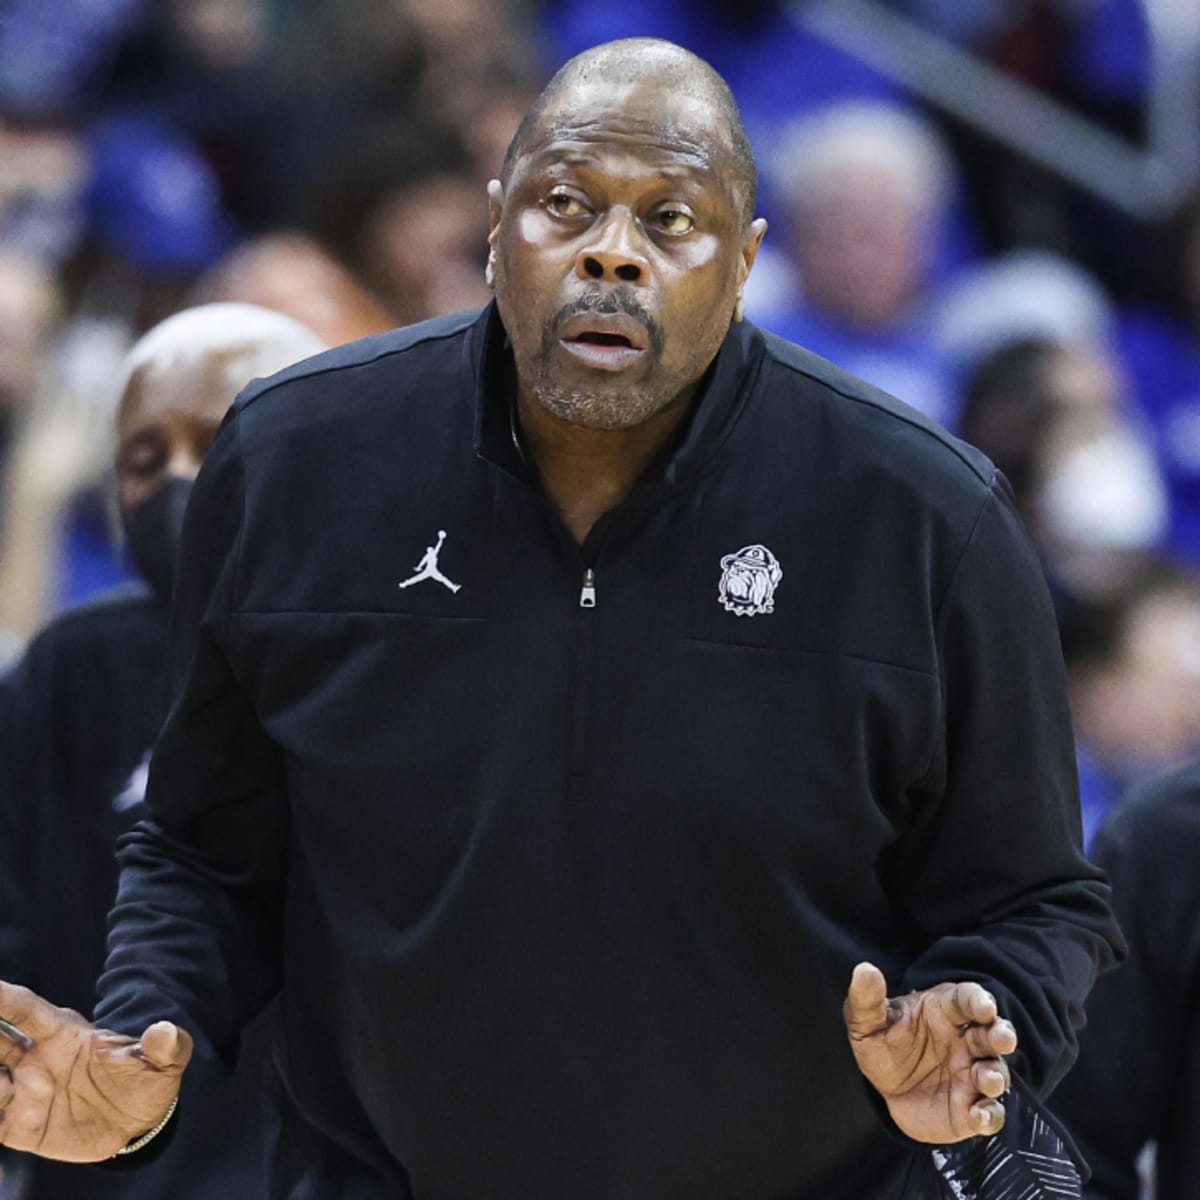 How Tall Is Patrick Ewing? News, Age, Awards, & More 2022